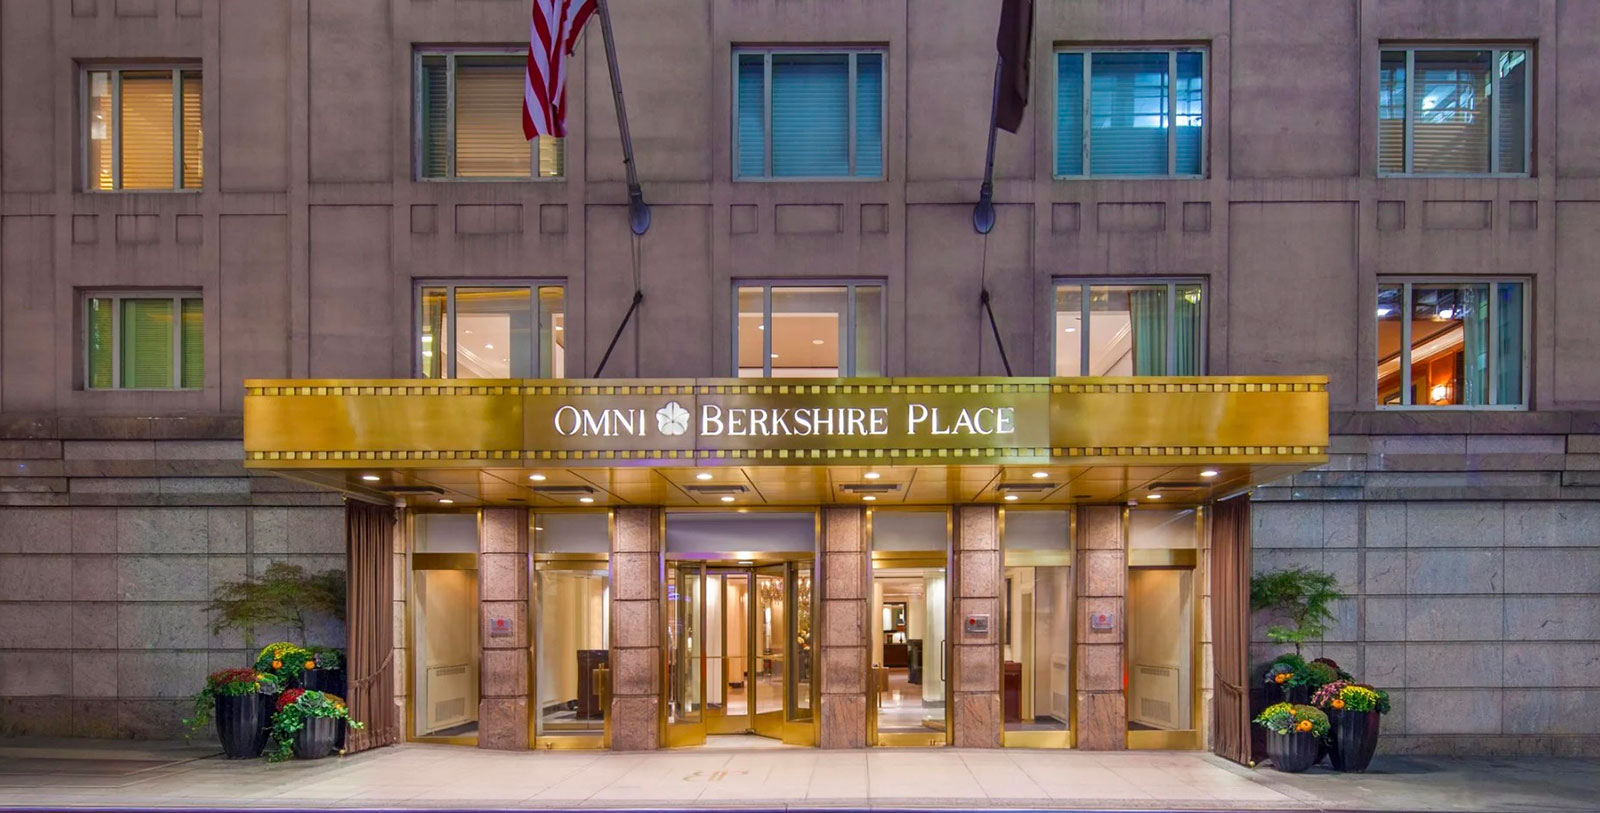 Image of Exterior, Omni Berkshire Place, New York City, New York, 1926, Member of Historic Hotels of America, Special Offers, Discounted Rates, Families, Romantic Escape, Honeymoons, Anniversaries, Reunions